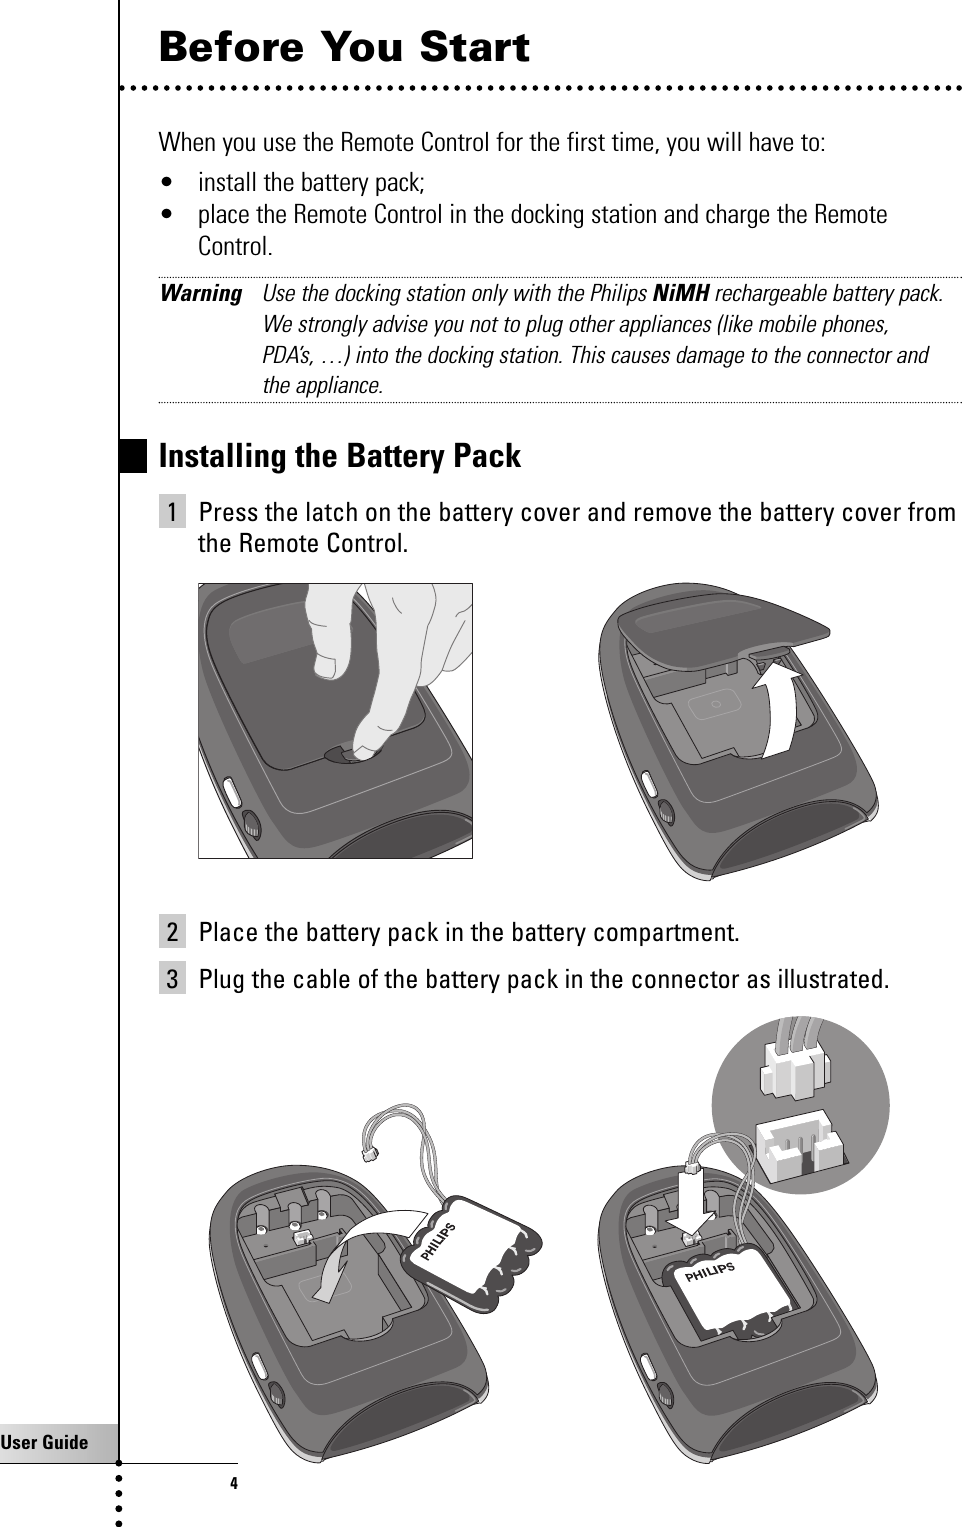 User Guide4Before You StartWhen you use the Remote Control for the first time, you will have to:• install the battery pack;• place the Remote Control in the docking station and charge the RemoteControl.Warning Use the docking station only with the Philips NiMH rechargeable battery pack.We strongly advise you not to plug other appliances (like mobile phones, PDA’s, …) into the docking station. This causes damage to the connector andthe appliance.Installing the Battery Pack1 Press the latch on the battery cover and remove the battery cover fromthe Remote Control.2 Place the battery pack in the battery compartment. 3 Plug the cable of the battery pack in the connector as illustrated.Taking a First Look